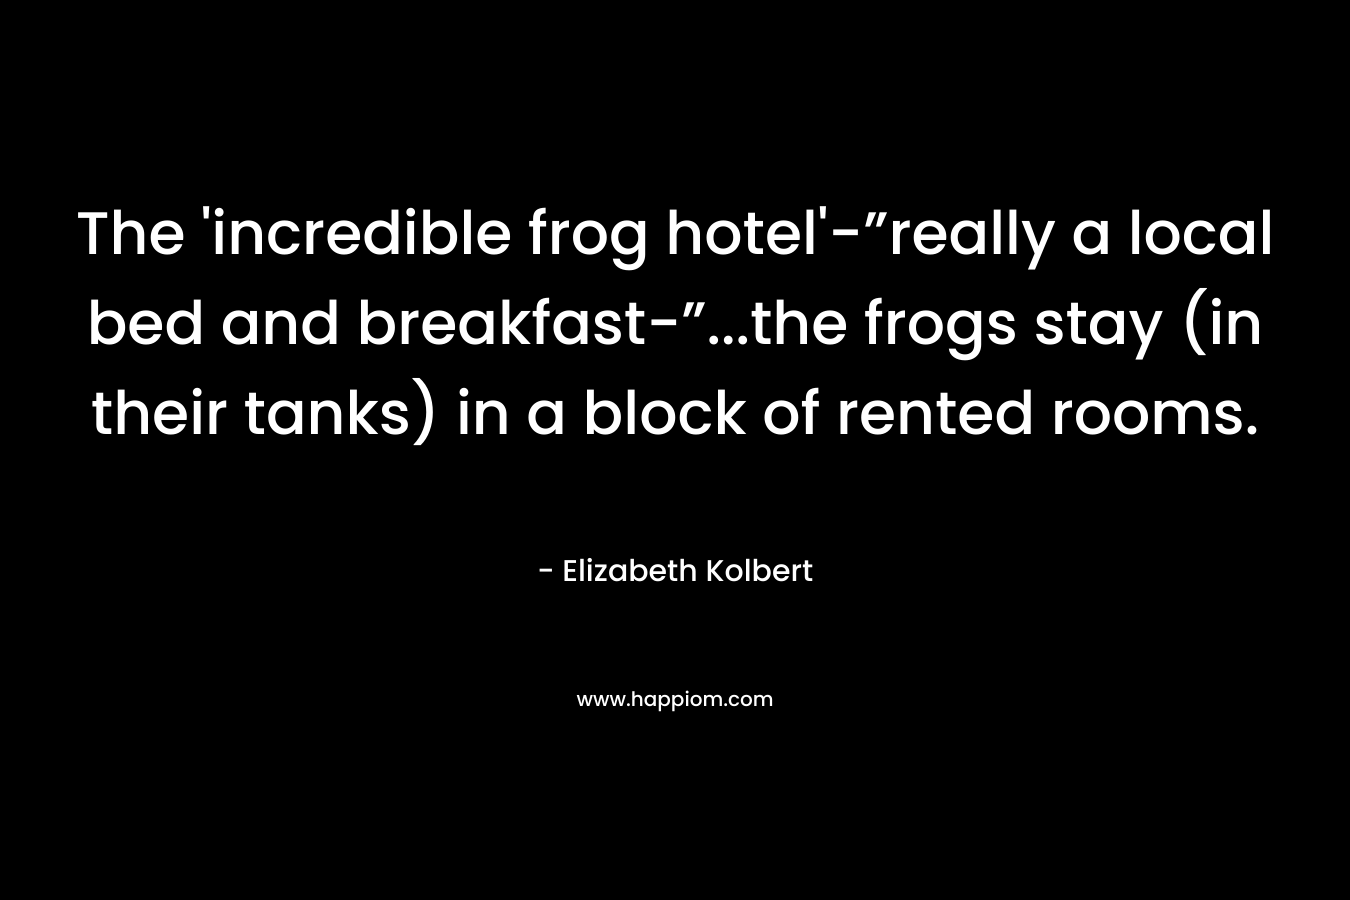 The 'incredible frog hotel'-”really a local bed and breakfast-”...the frogs stay (in their tanks) in a block of rented rooms.